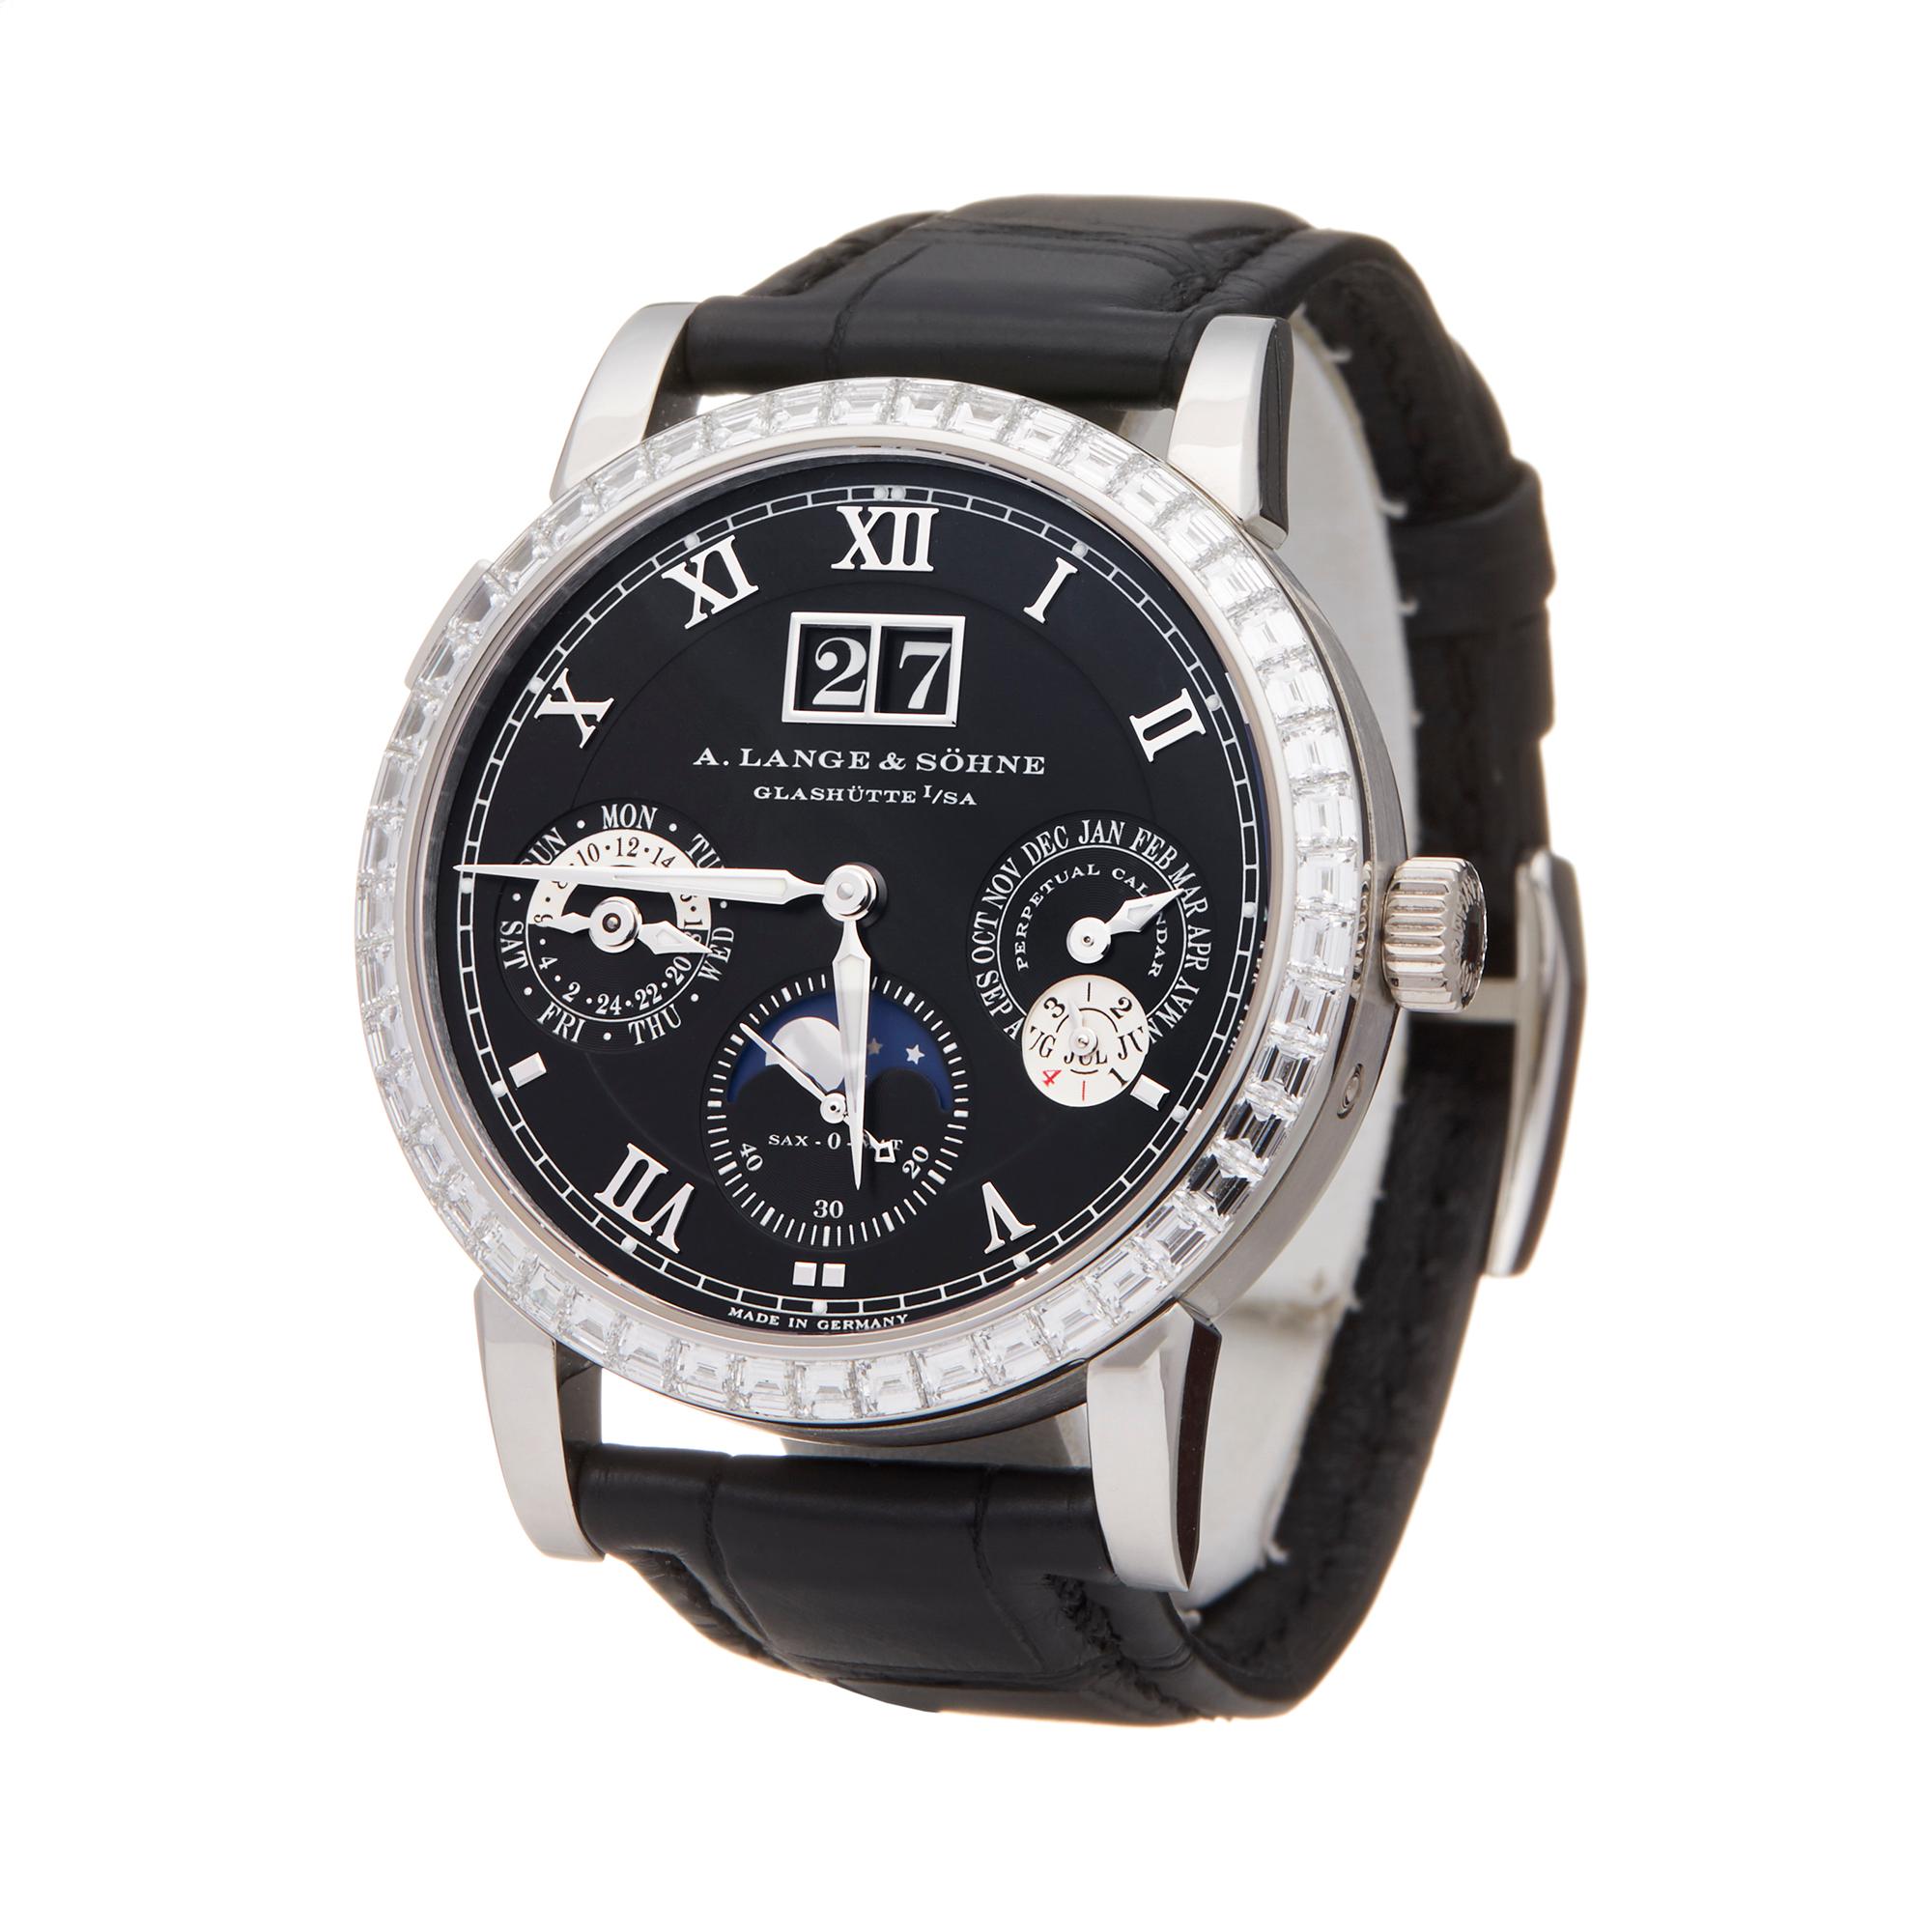 Ref: COM2081
Manufacturer: A. Lange & Söhne
Model: Langematik
Model Ref: 820.036
Age: COM2081
Gender: Mens
Complete With: Box Only
Dial: Black Roman
Glass: Sapphire Crystal
Movement: Automatic
Water Resistance: To Manufacturers Specifications
Case: